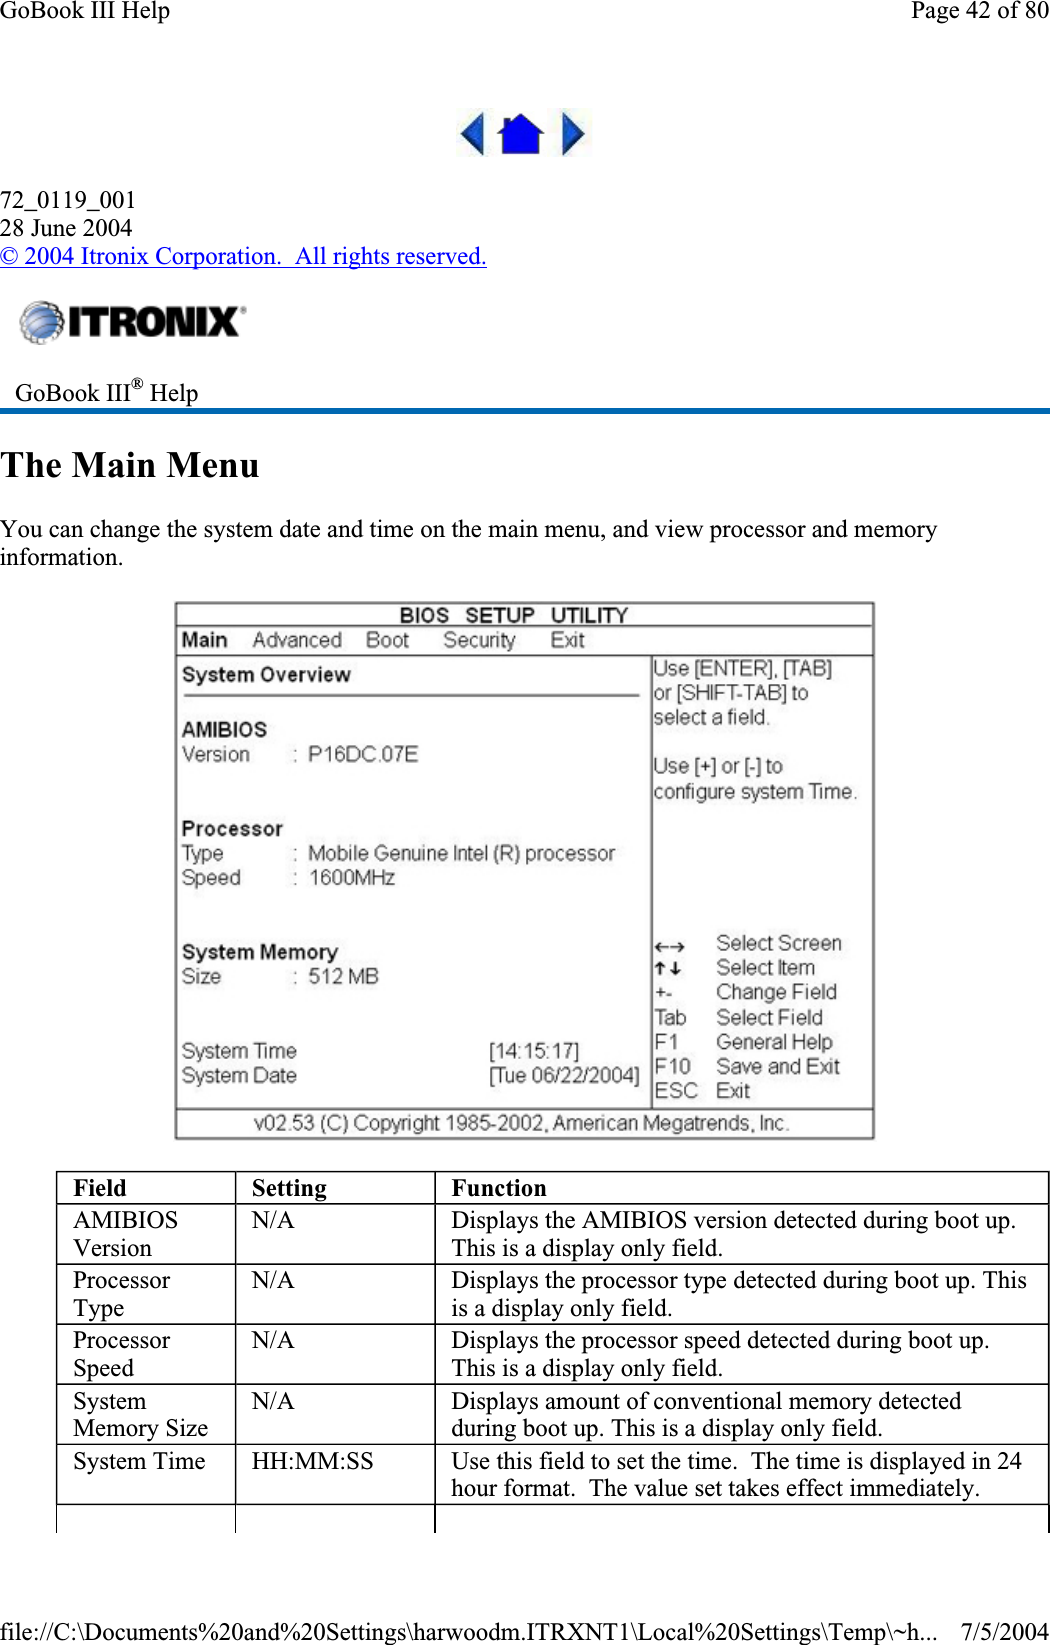 72_0119_00128 June 2004©2004 Itronix Corporation.  All rights reserved.The Main Menu You can change the system date and time on the main menu, and view processor and memory information.GoBook III® HelpField Setting FunctionAMIBIOSVersionN/A Displays the AMIBIOS version detected during boot up. This is a display only field. ProcessorTypeN/A Displays the processor type detected during boot up. This is a display only field. ProcessorSpeedN/A Displays the processor speed detected during boot up. This is a display only field. SystemMemory Size N/A Displays amount of conventional memory detected during boot up. This is a display only field. System Time  HH:MM:SS  Use this field to set the time.  The time is displayed in 24 hour format.  The value set takes effect immediately. Page 42 of 80GoBook III Help7/5/2004file://C:\Documents%20and%20Settings\harwoodm.ITRXNT1\Local%20Settings\Temp\~h...